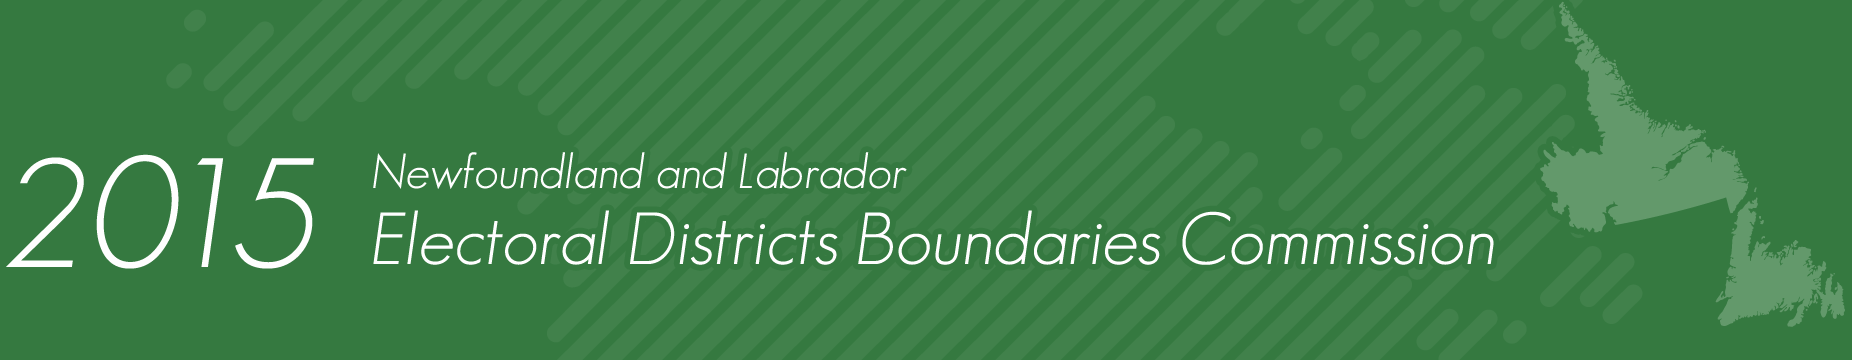 2015 Newfoundland and Labrador Electoral Districts Boundaries Commission